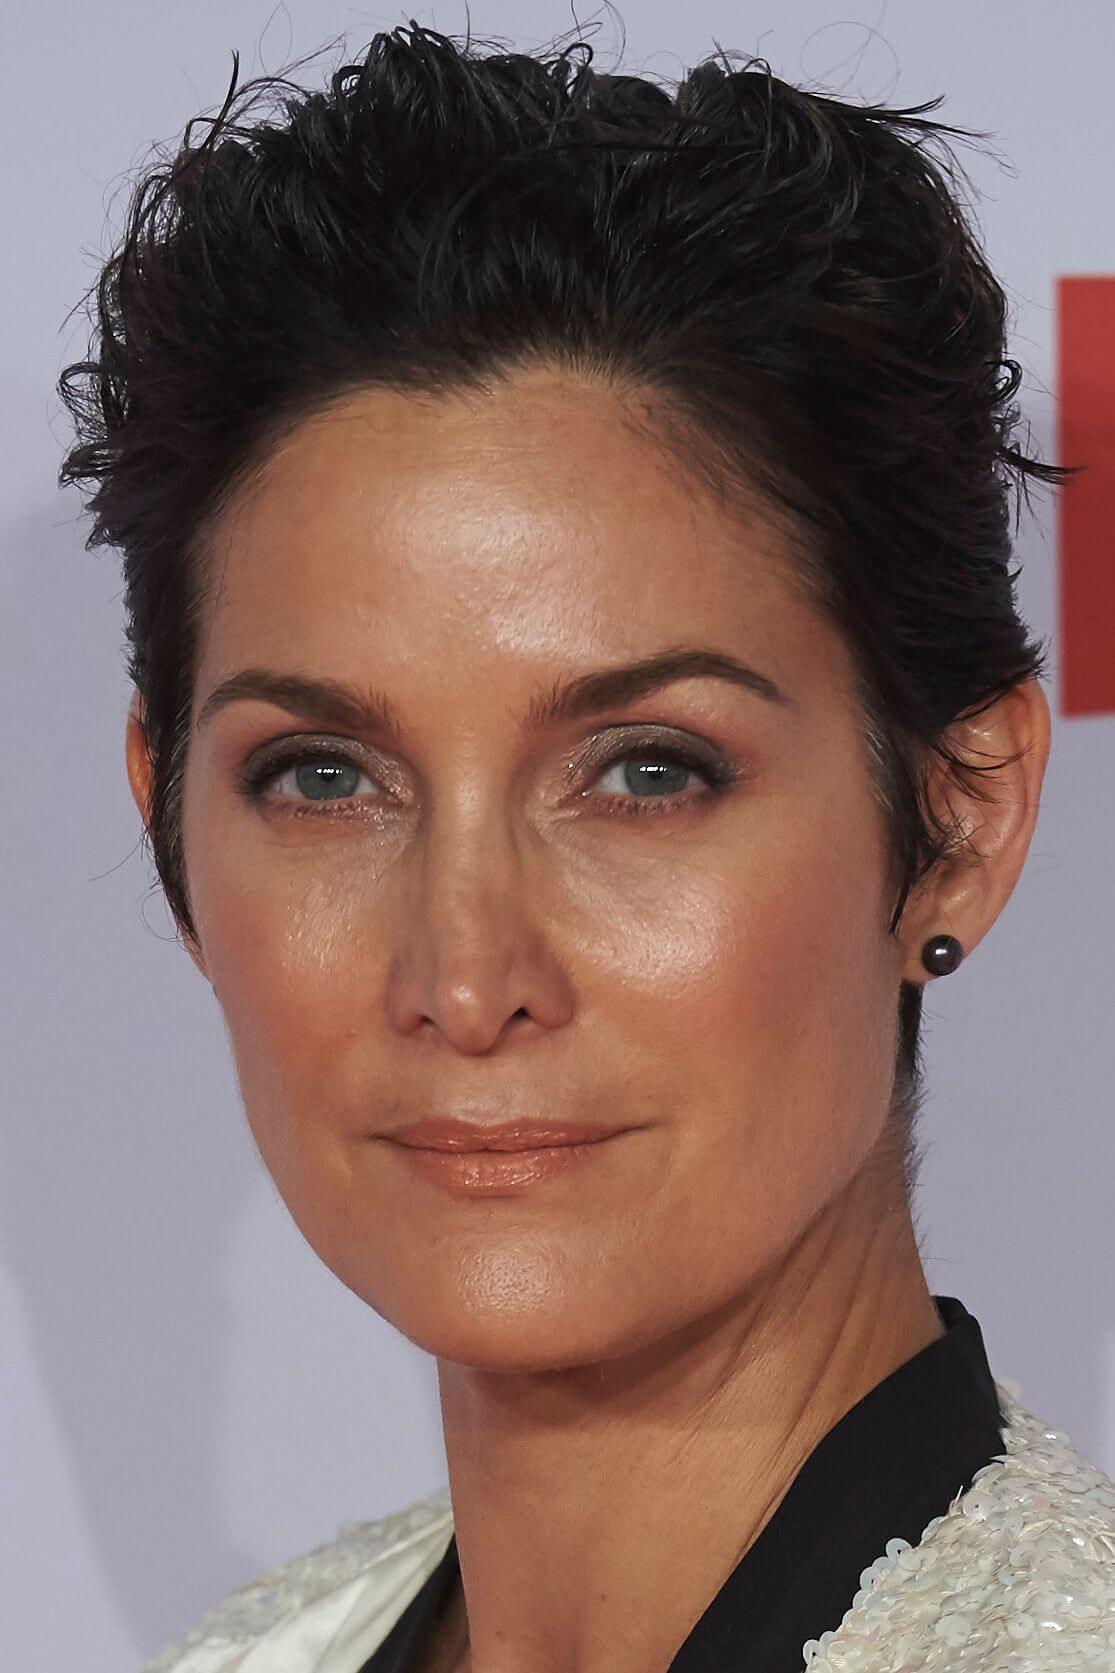 70+ Hot Pictures Of Carrie Anne Moss Will Drive You Nuts For Her 376